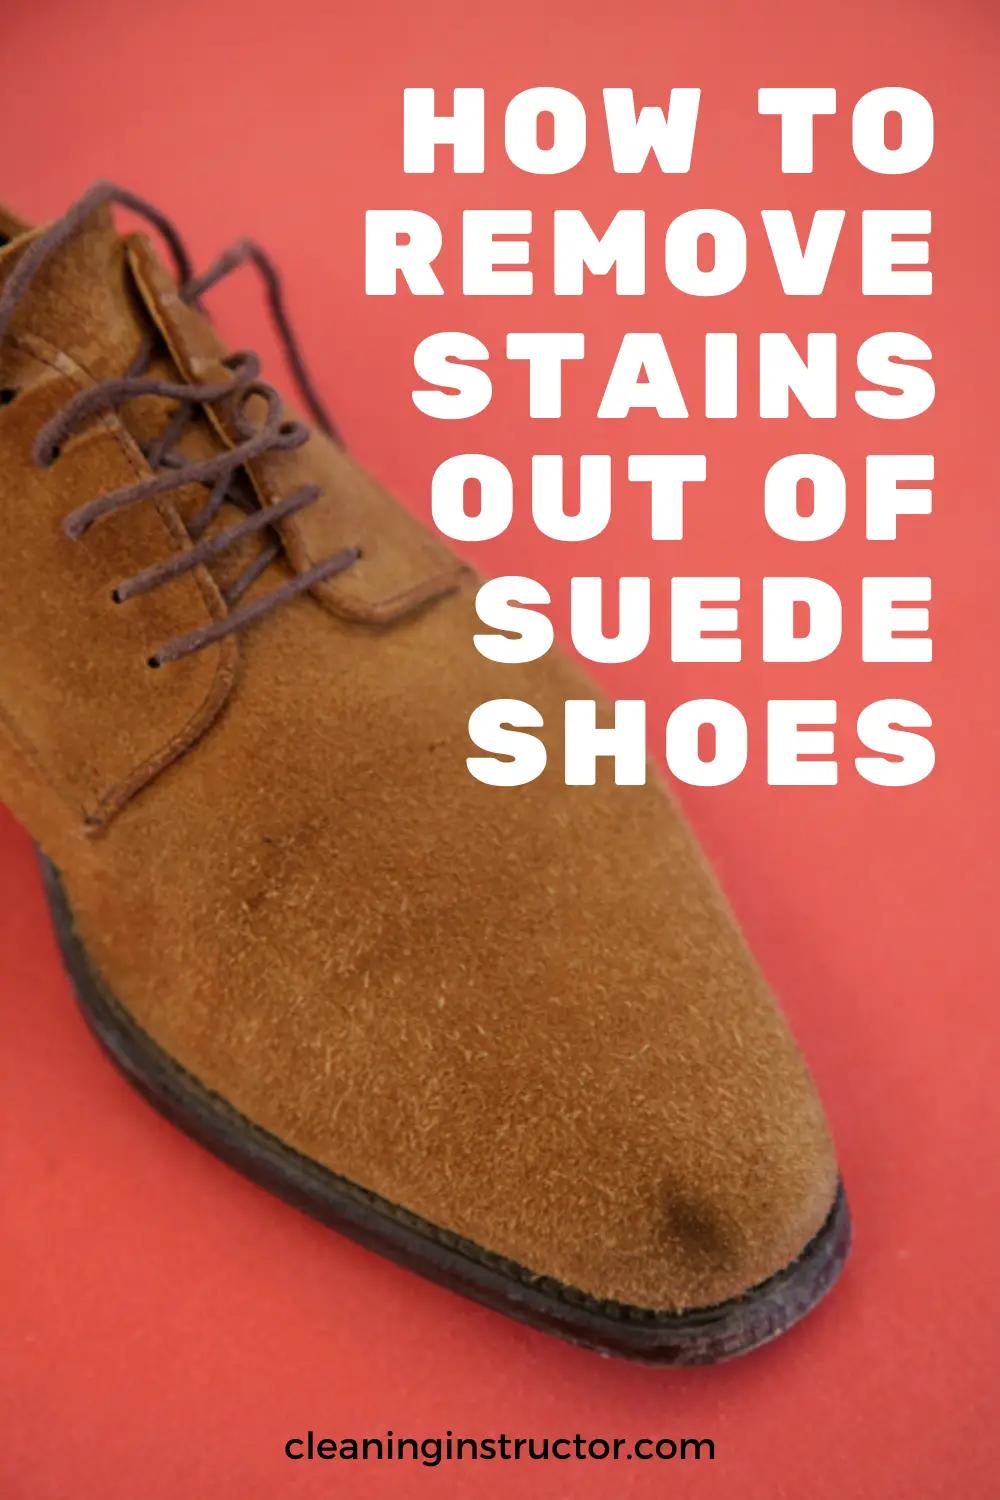 How to remove stains out of suede shoes ...